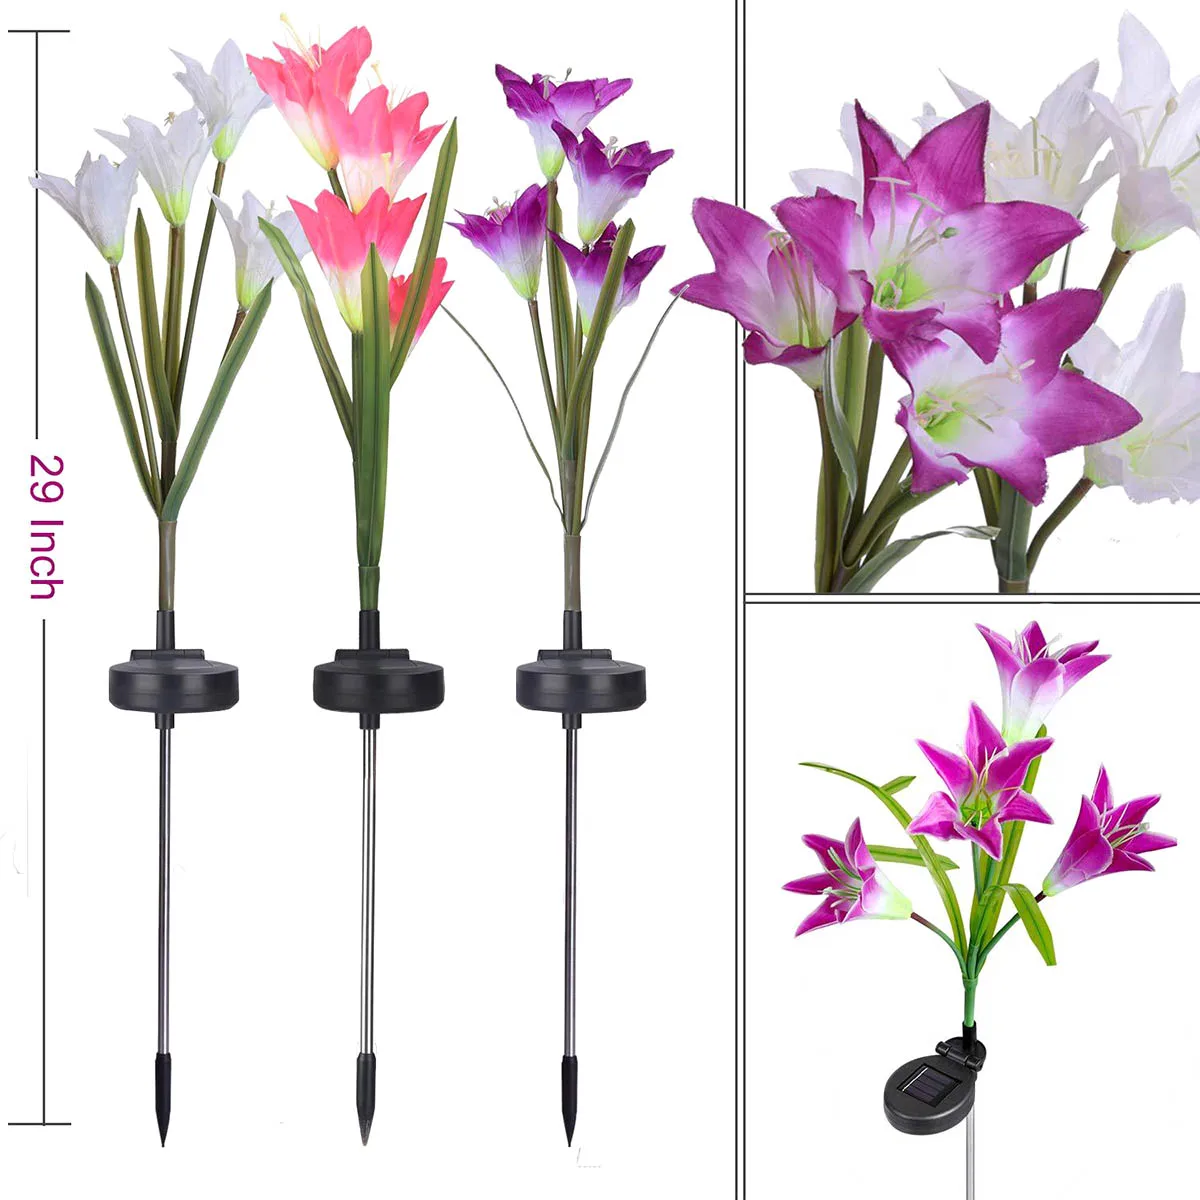 

White + Purple + Powder 3PCS Garden Solar Lights Color Changing LED Solar Stake Lights With 12 Lily Flower For Patio Backyard